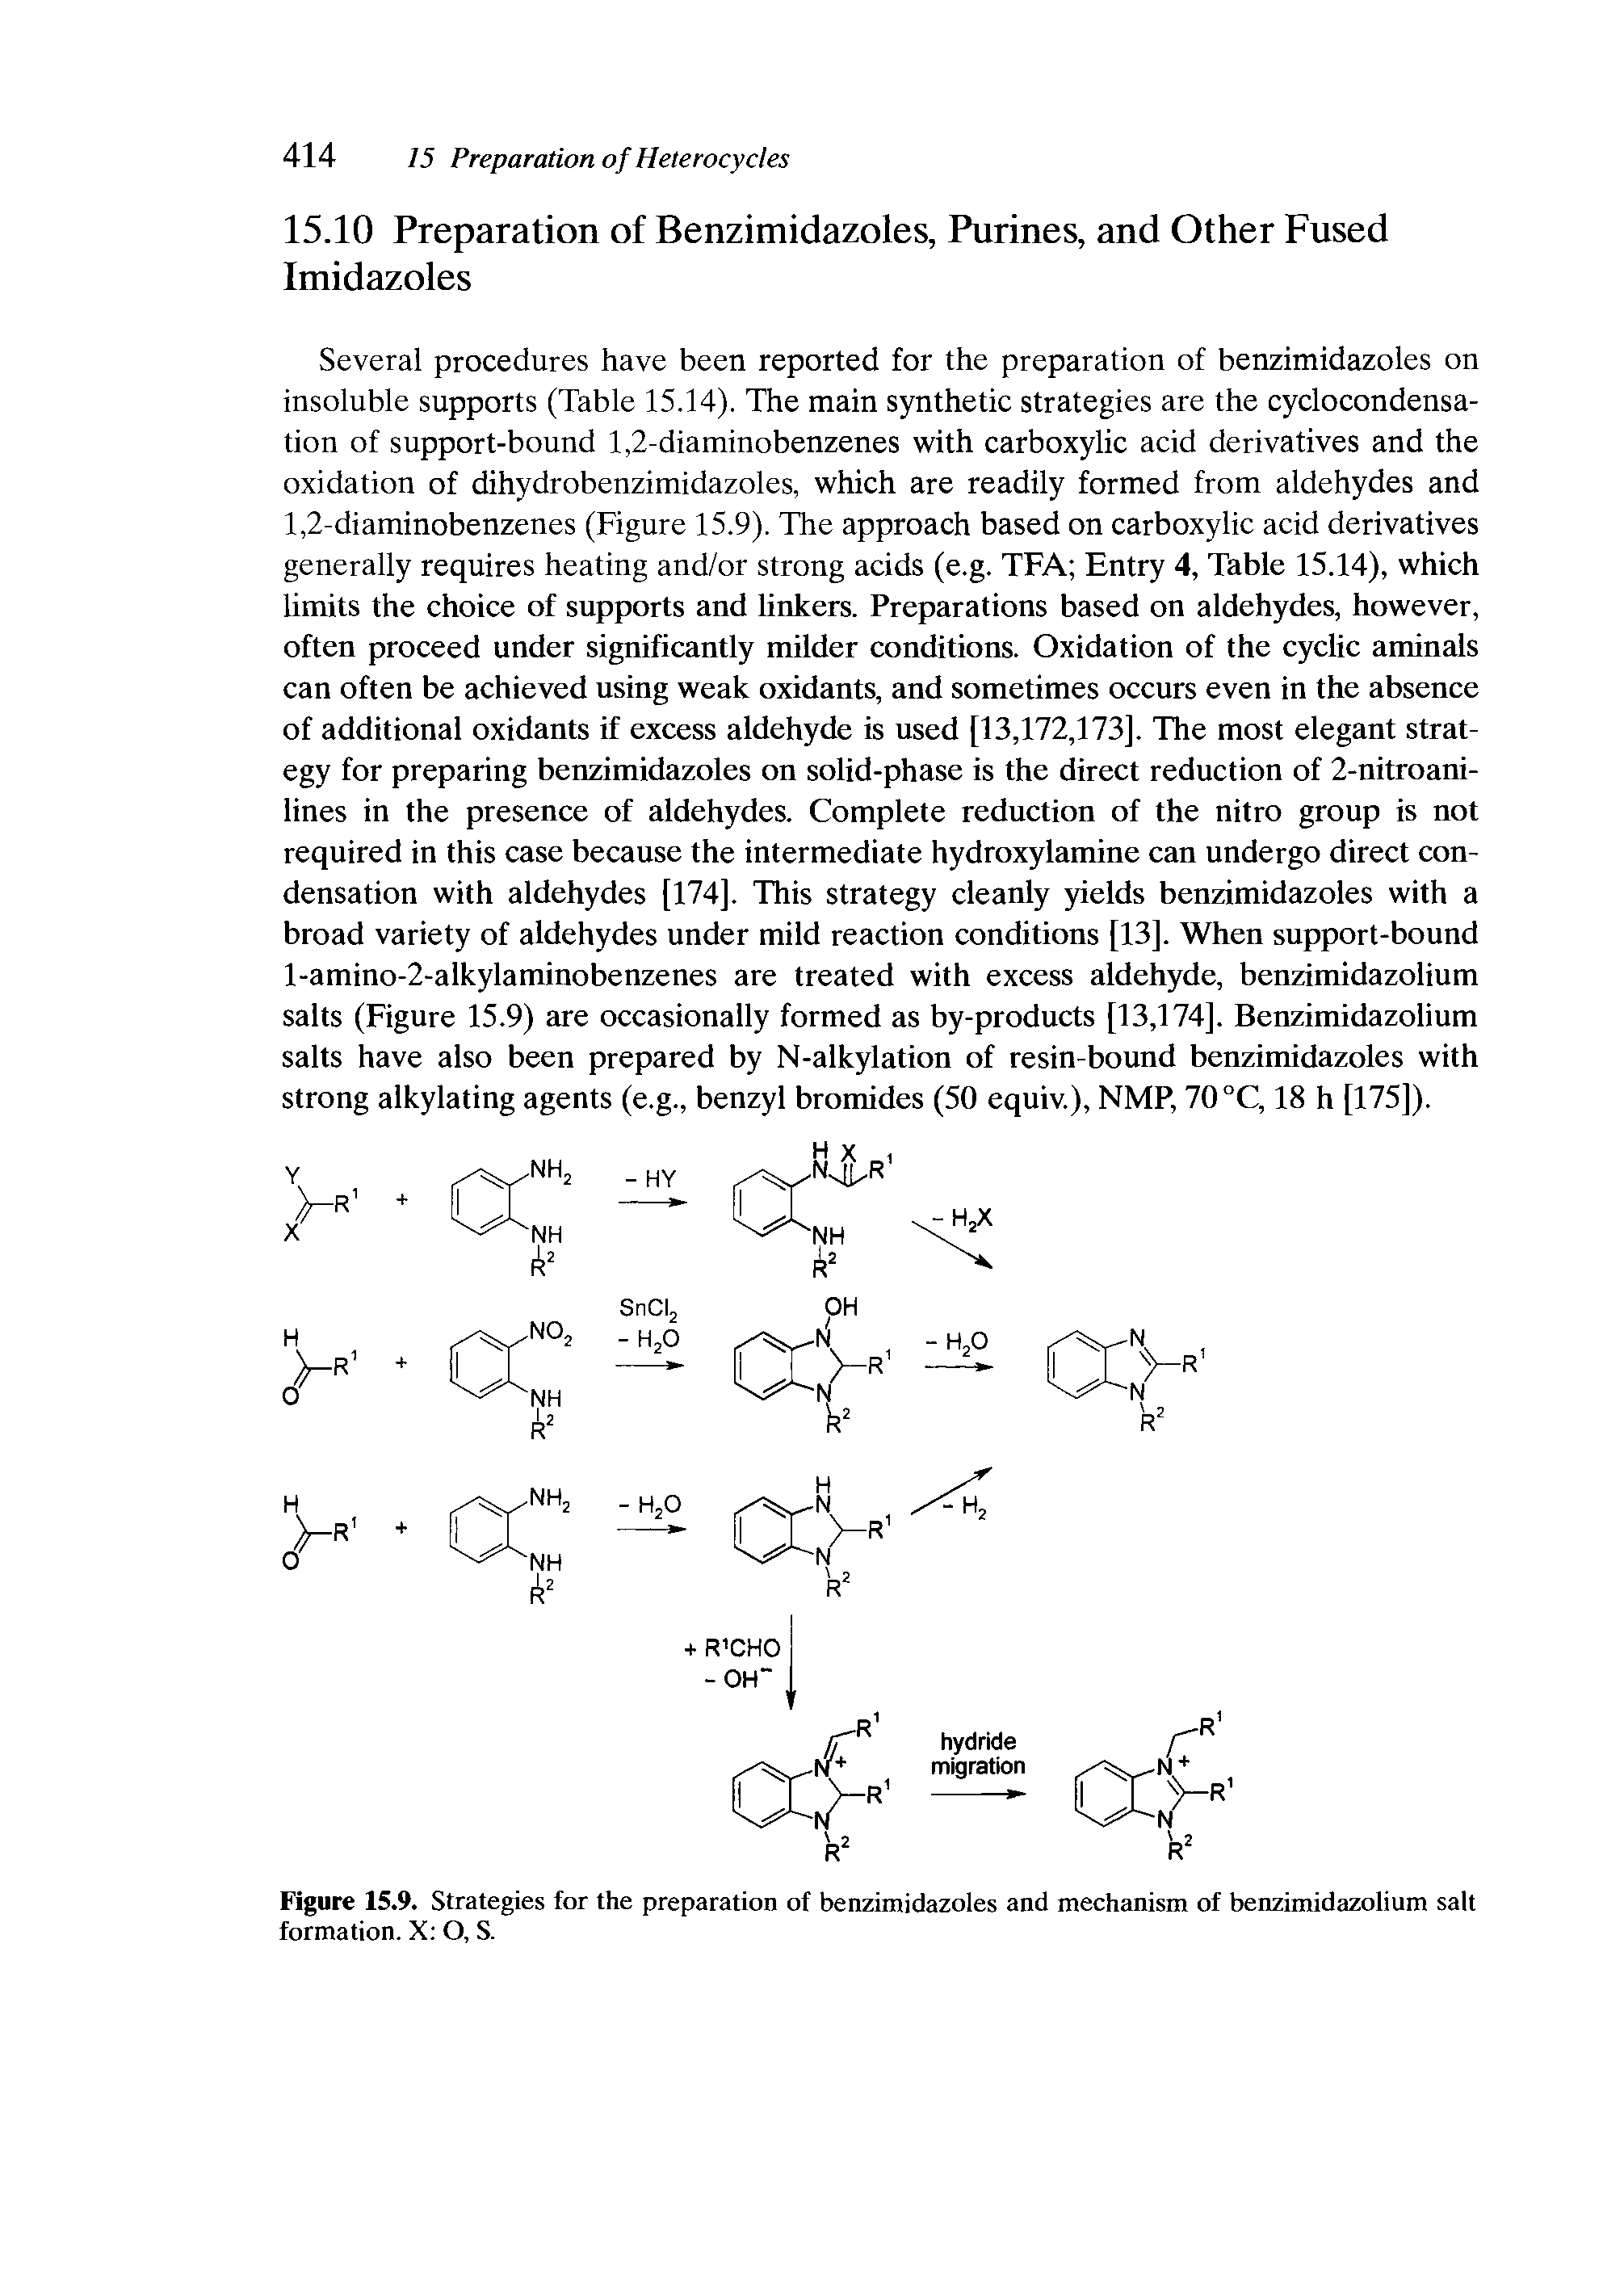 Figure 15.9. Strategies for the preparation of benzimidazoles and mechanism of benzimidazolium salt formation. X O, S.